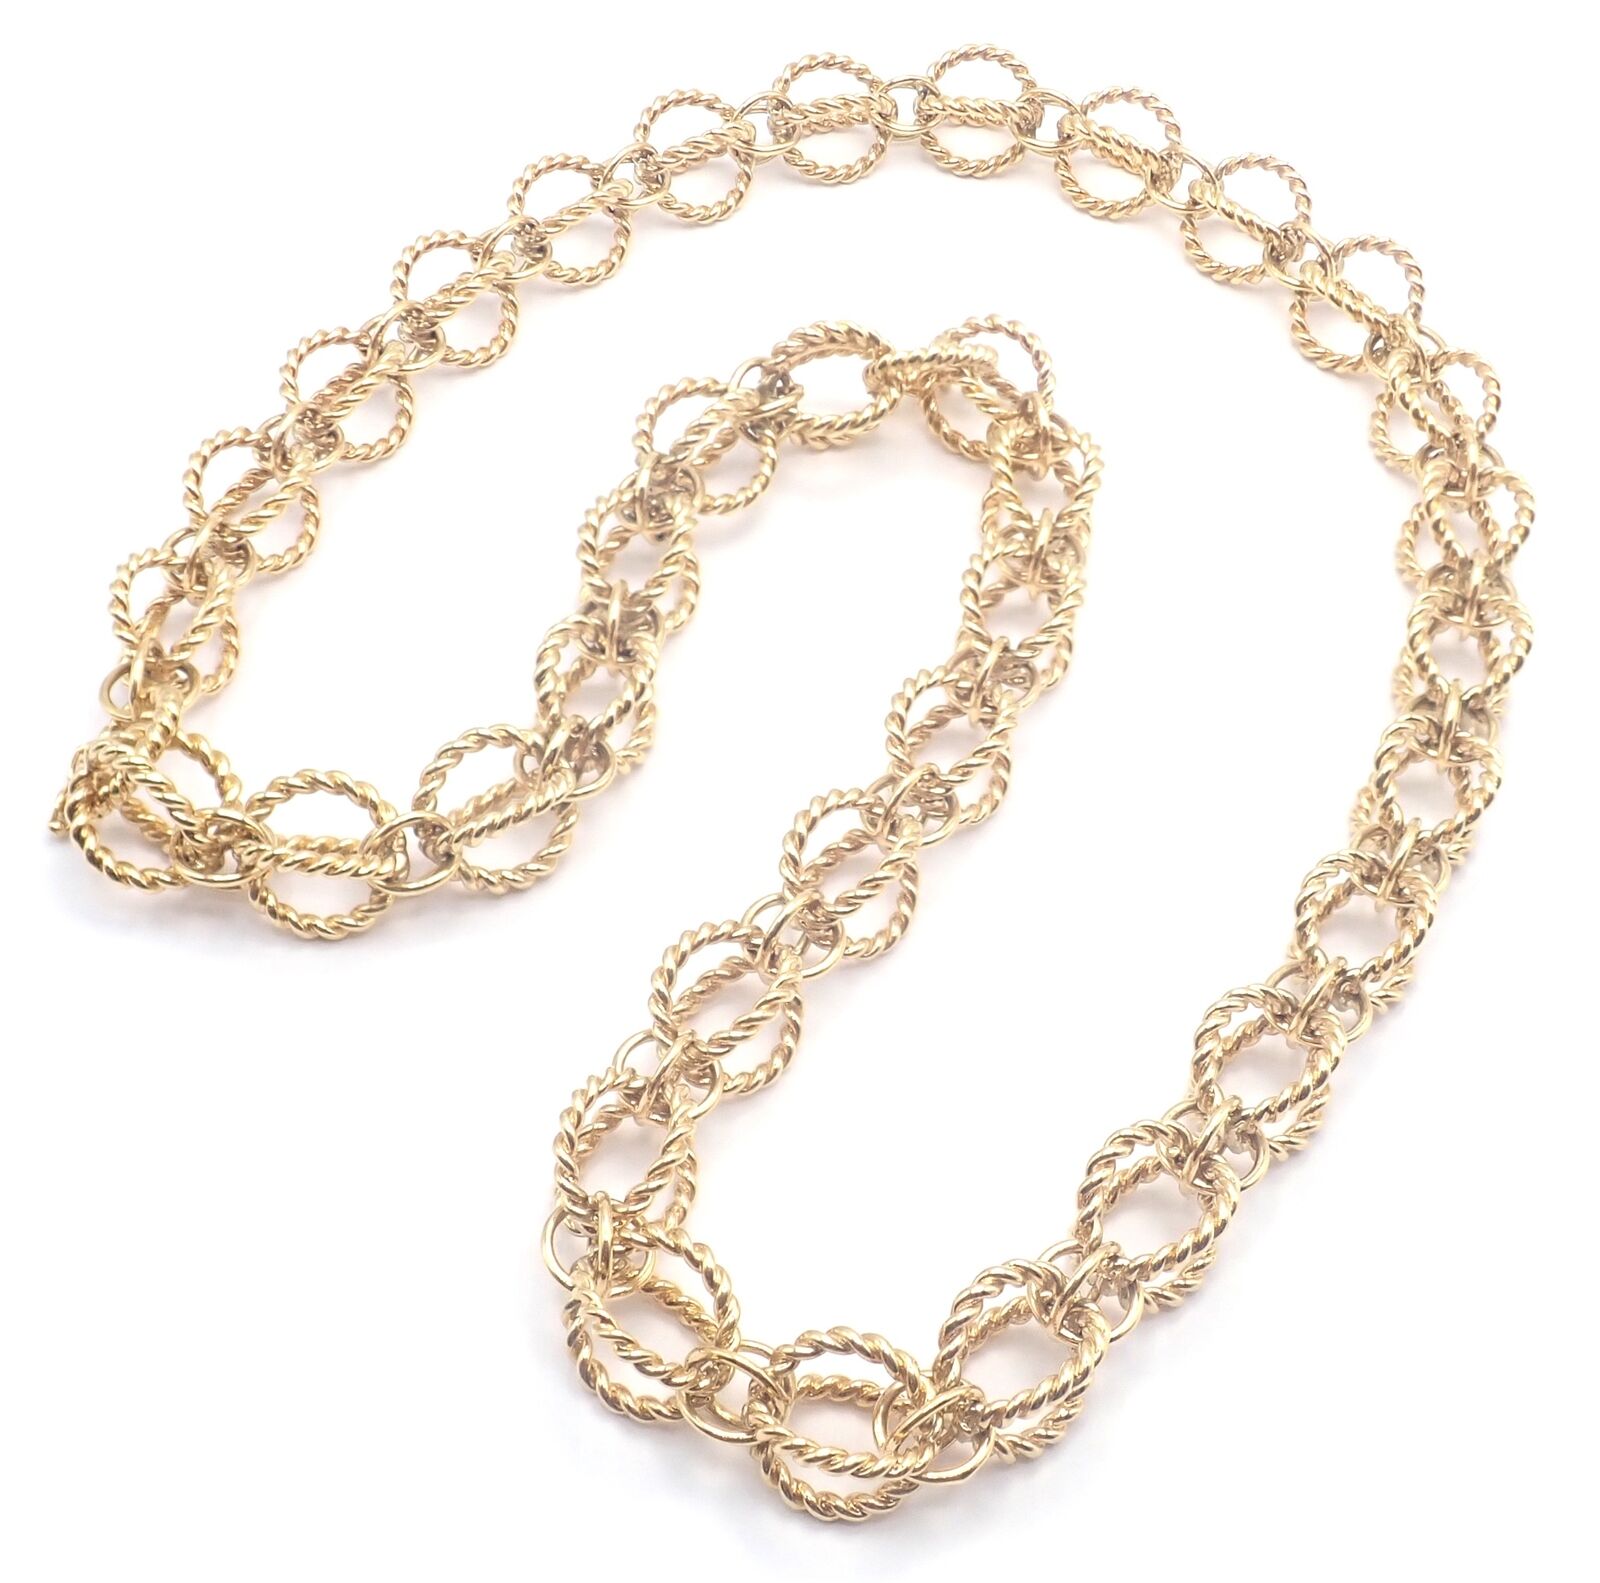 Tiffany & Co Schlumberger Circle Rope Necklace in 18K Gold